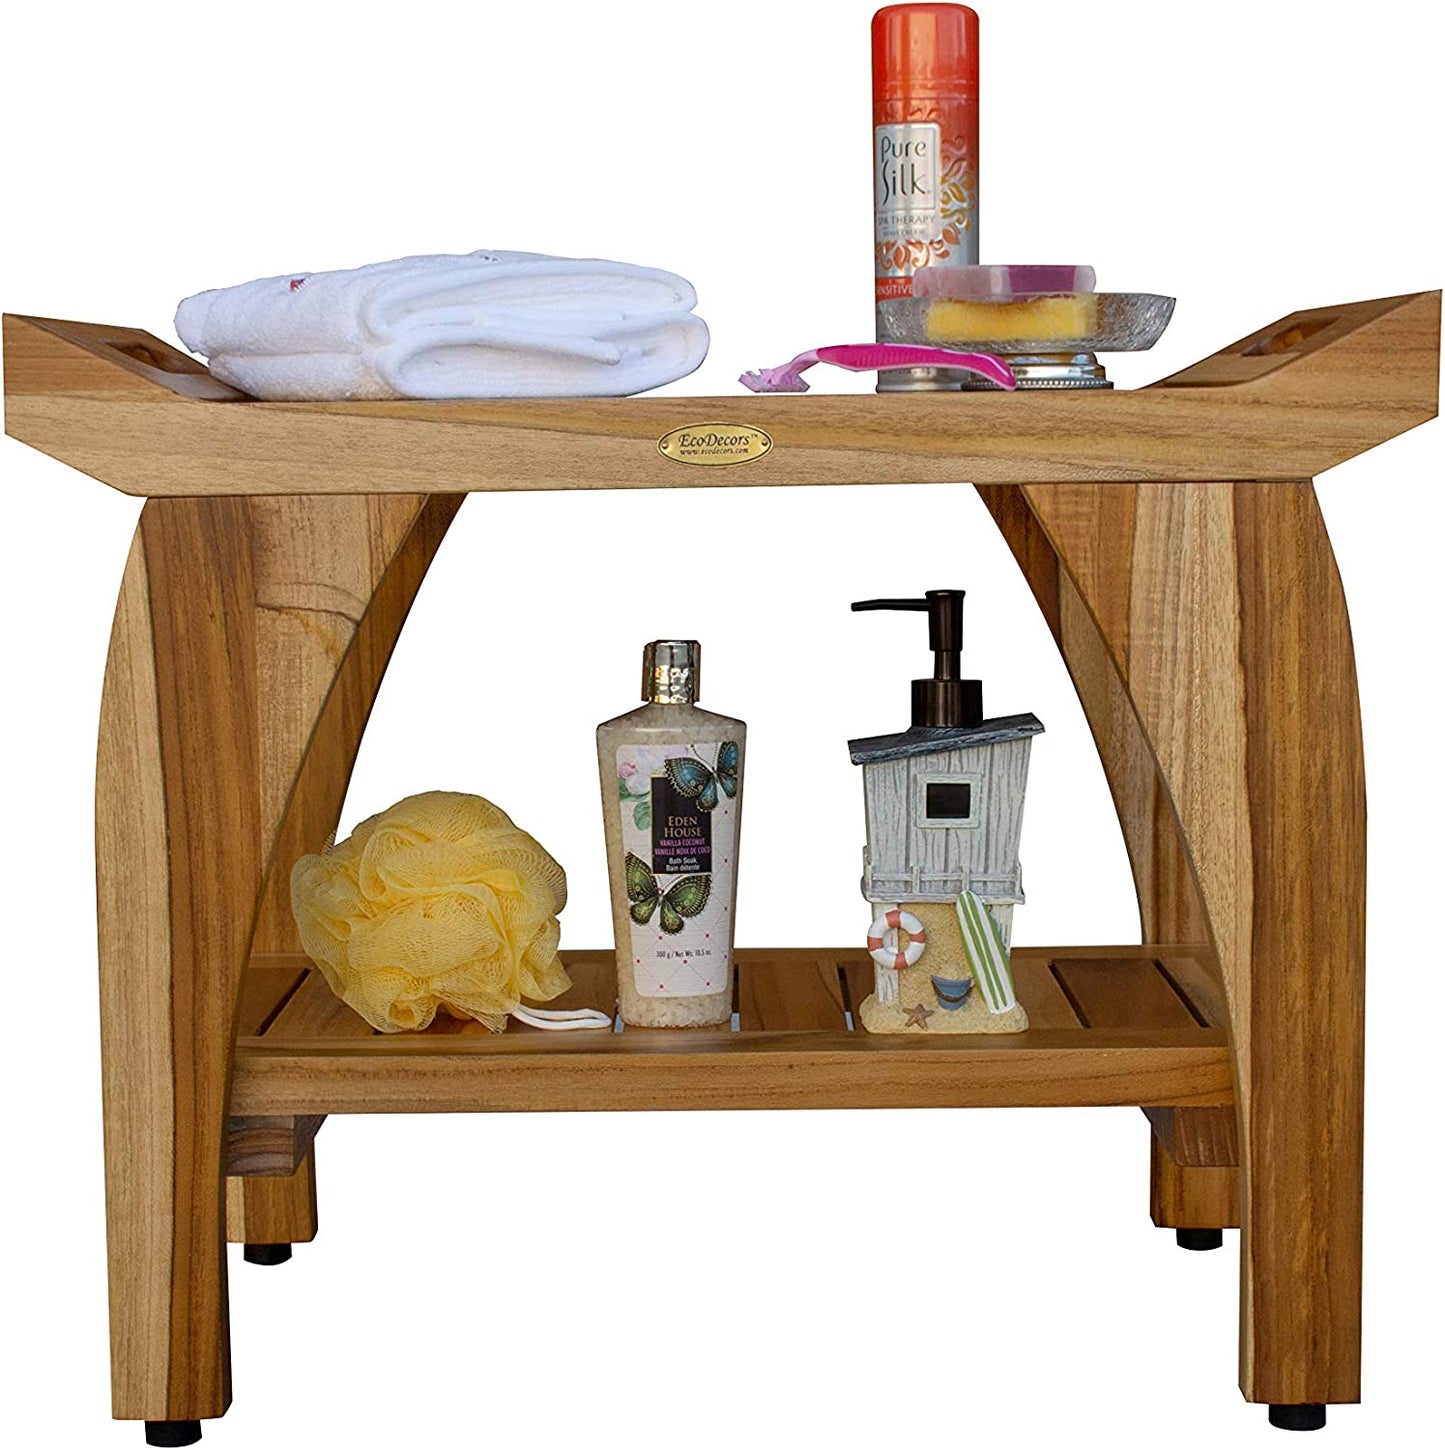 Earthy Teak Tranquility Shower Bench Natural Wood Shower Stool with Storage Shelf and Liftaide Arms for Indoors and Outdoors -24 Inches Length